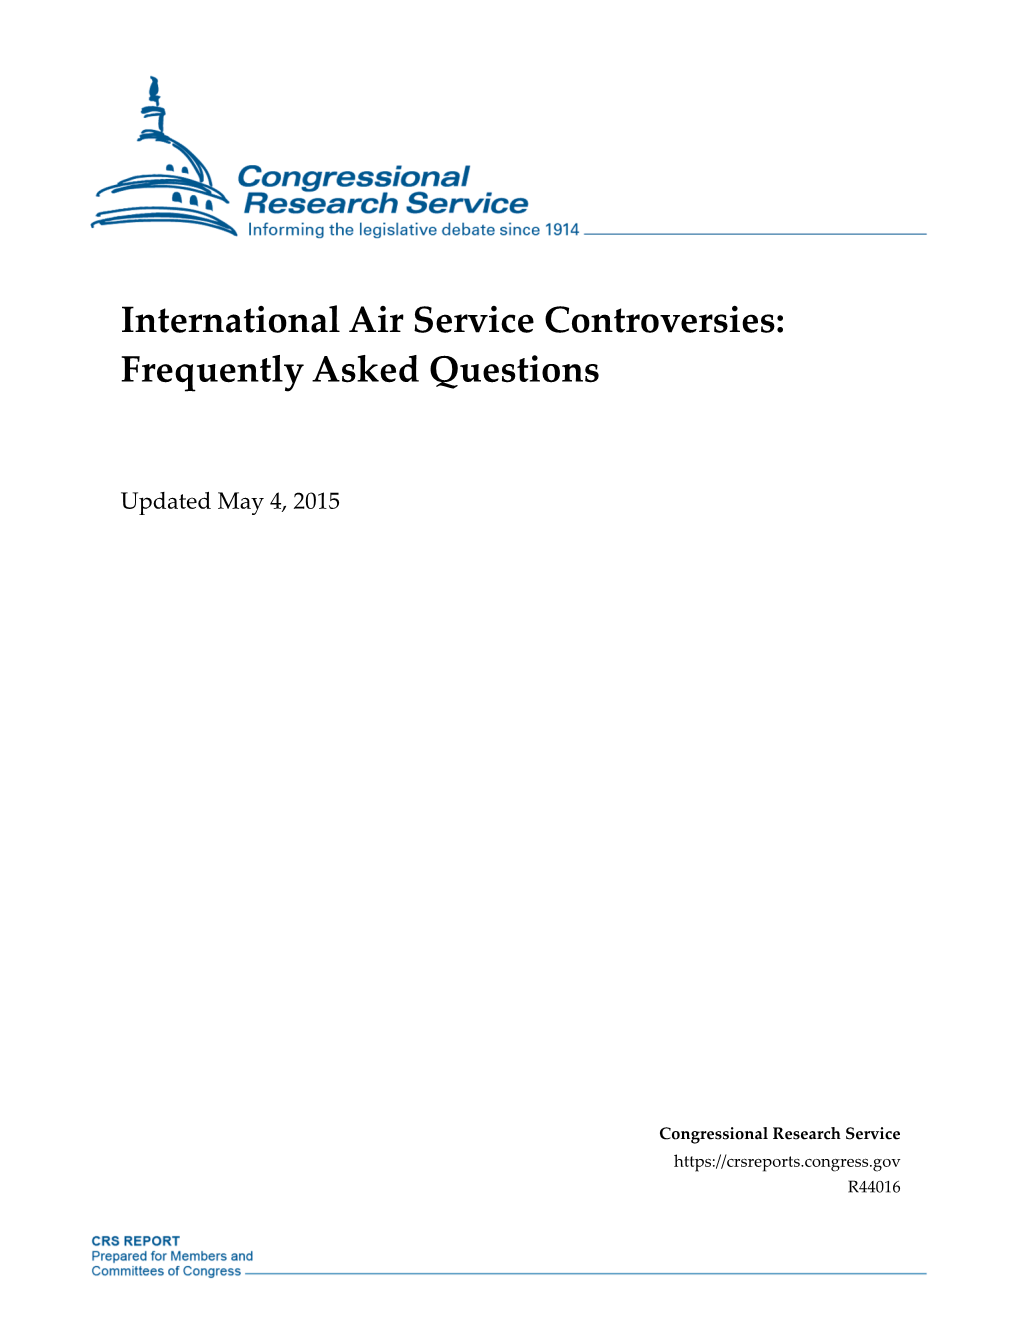 International Air Service Controversies: Frequently Asked Questions